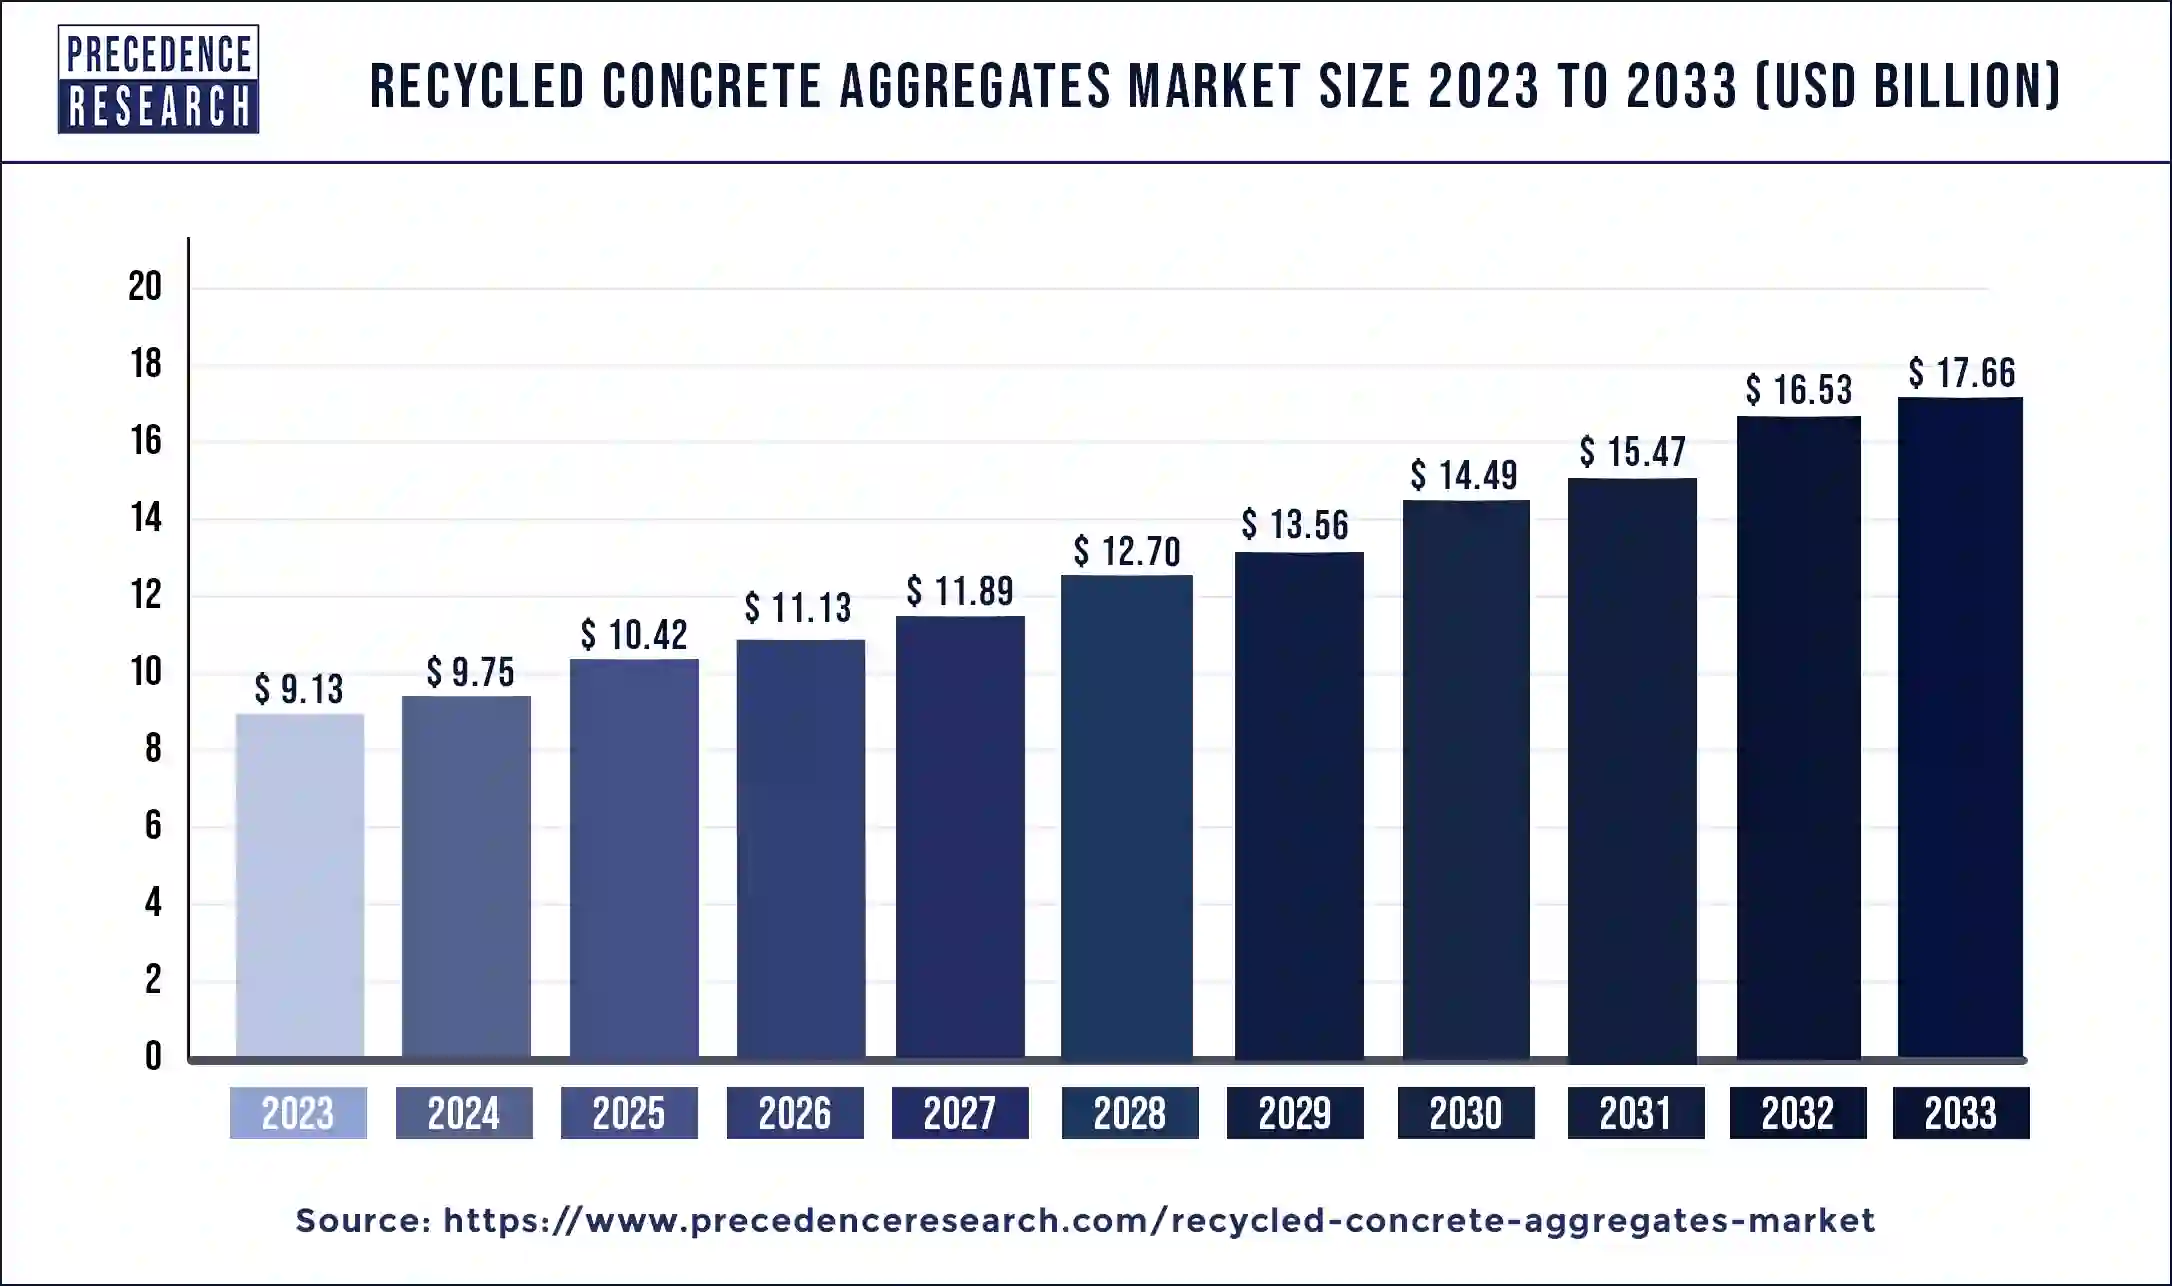 Recycled Concrete Aggregates Market Size 2024 to 2033